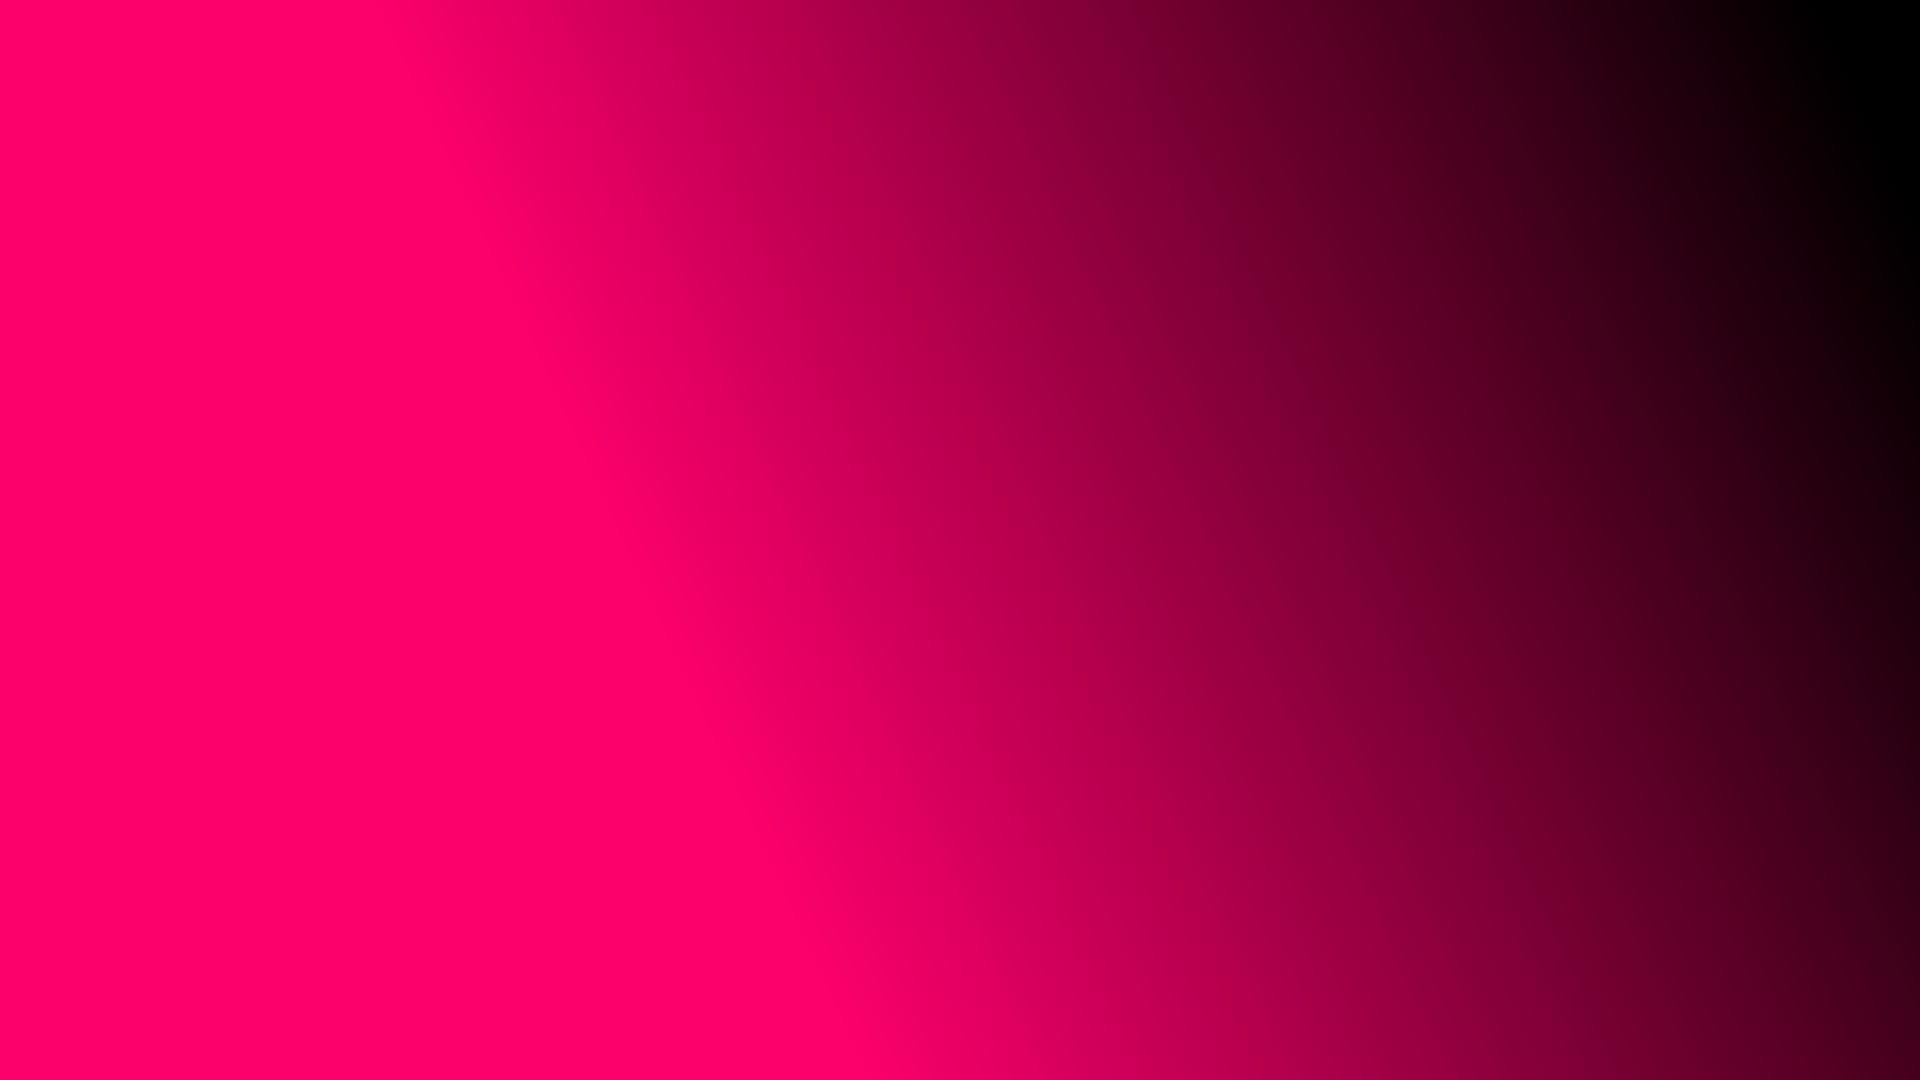 1920x1080 wallpaper.wiki-Pink-And-Black-Backgrounds-PIC-WPE001929